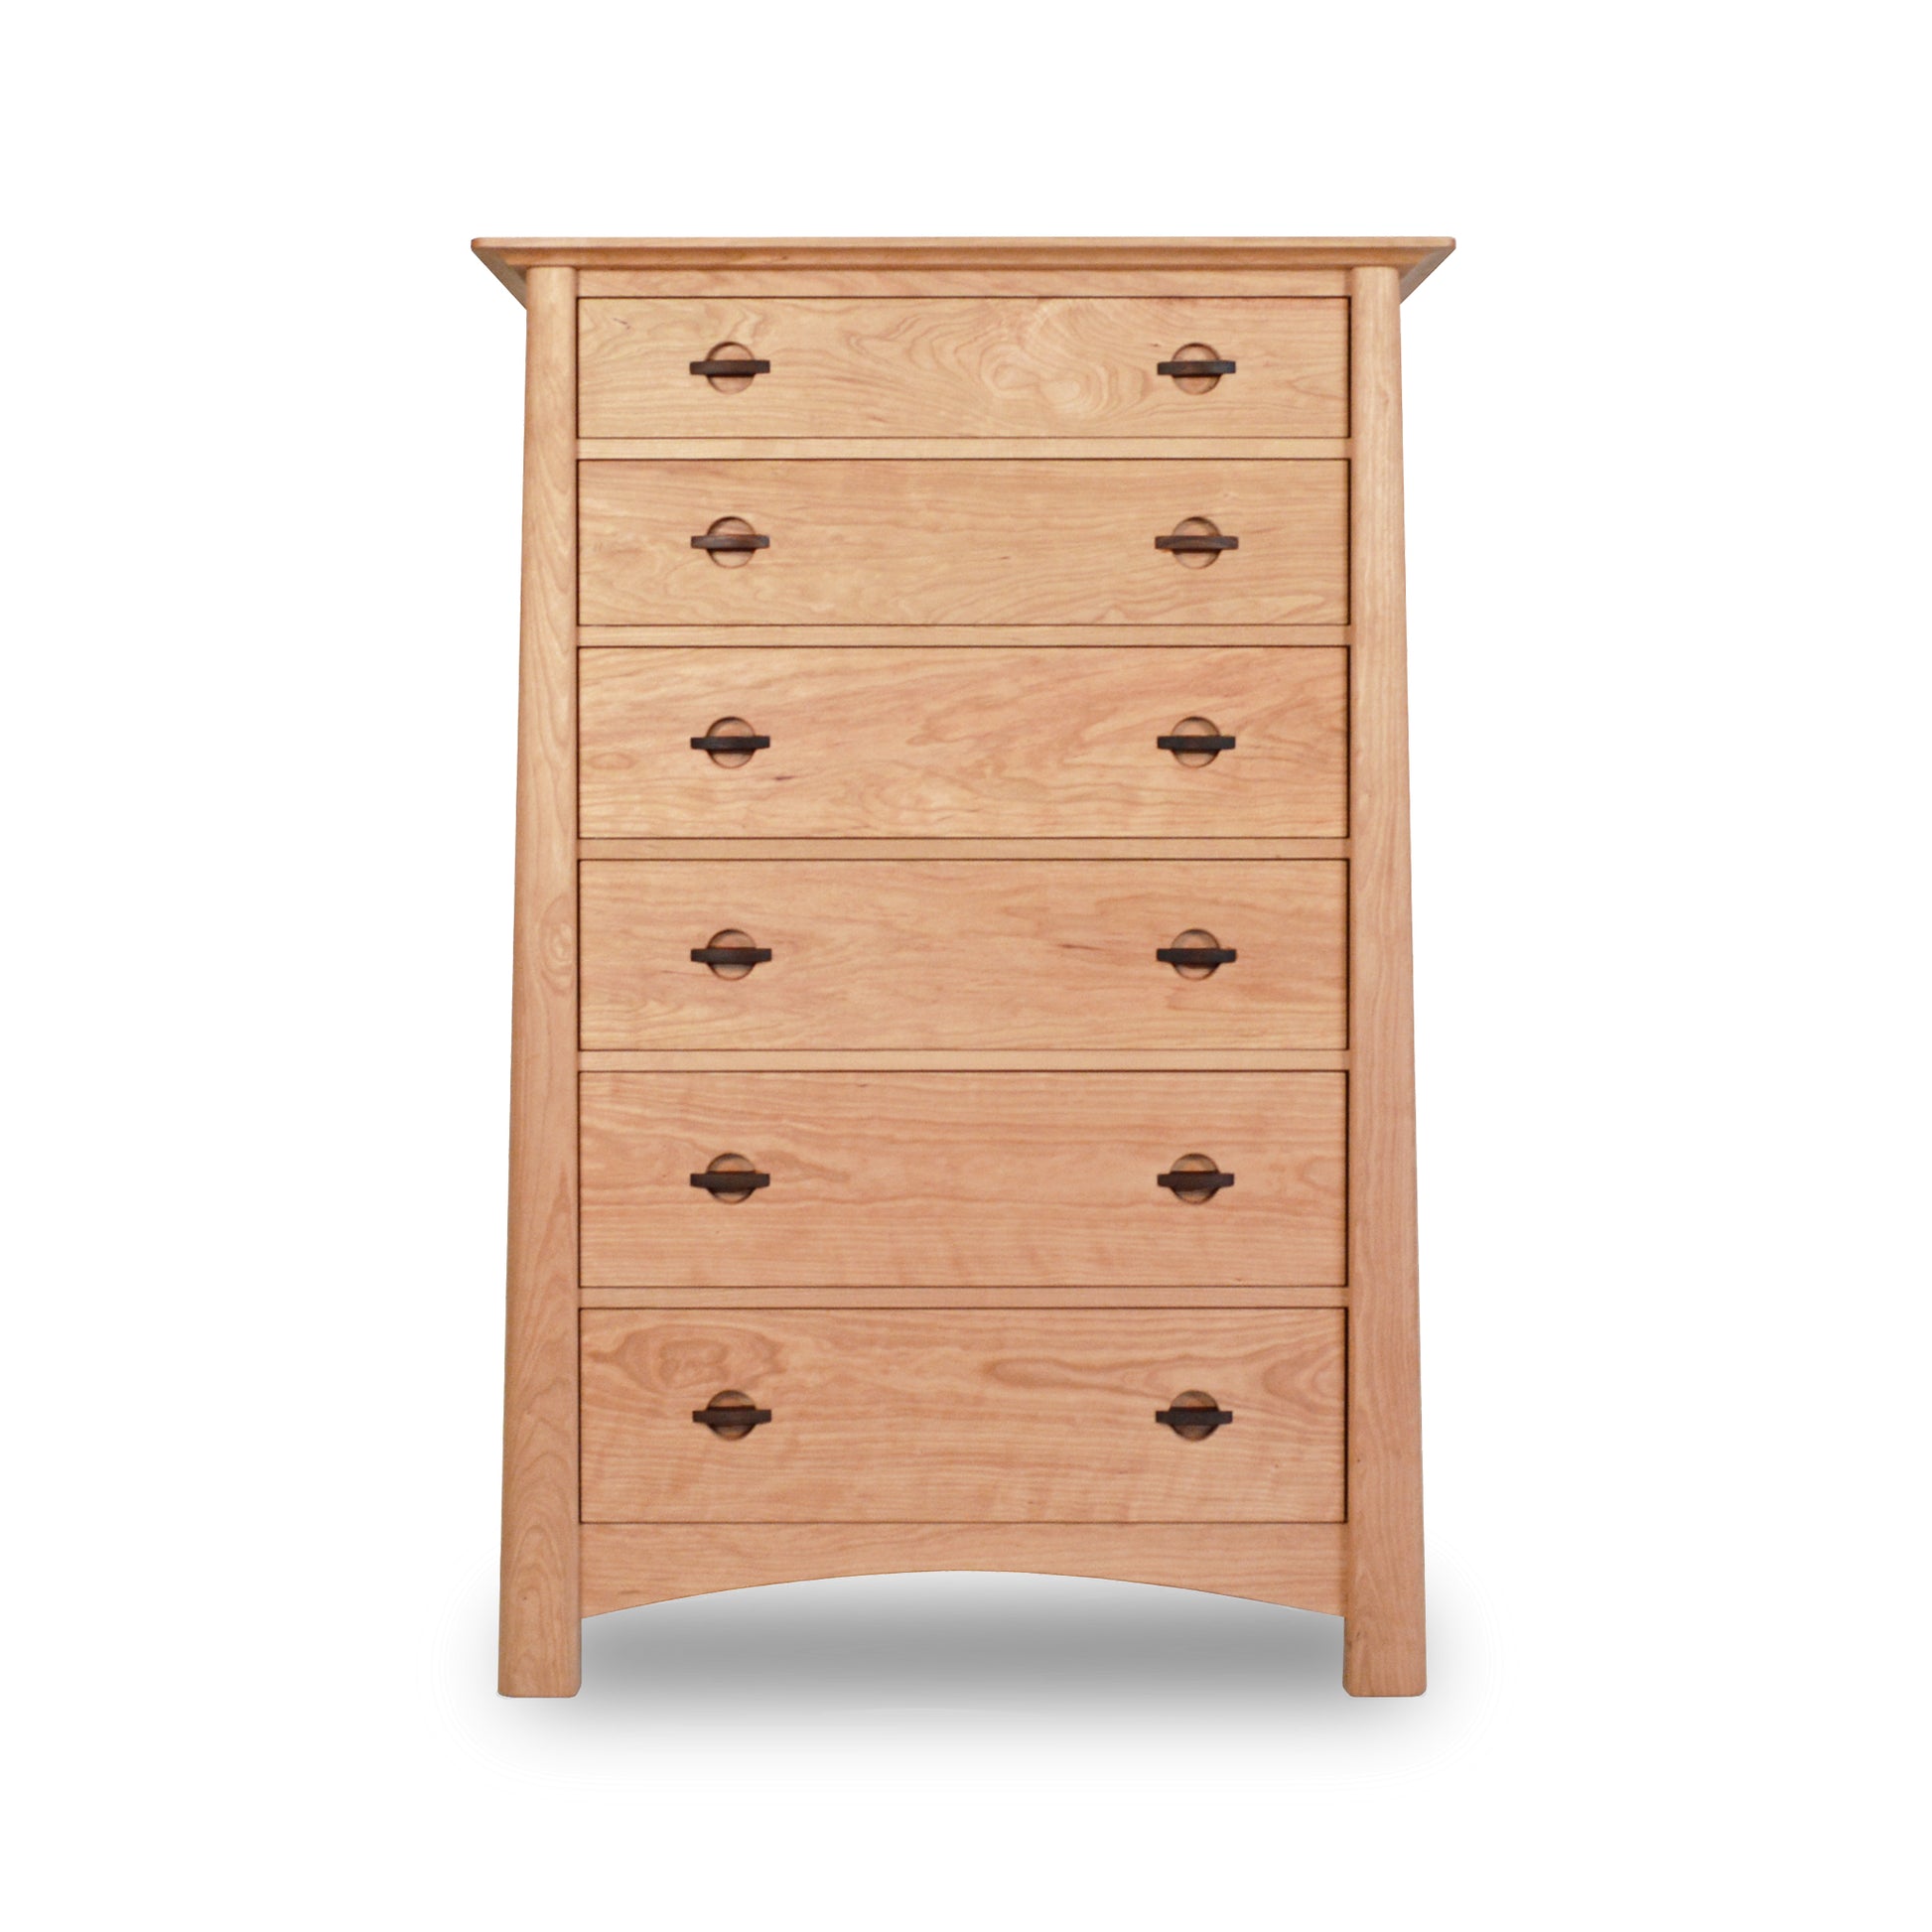 A beautiful Cherry Moon 6-Drawer Chest by Maple Corner Woodworks on a white background.